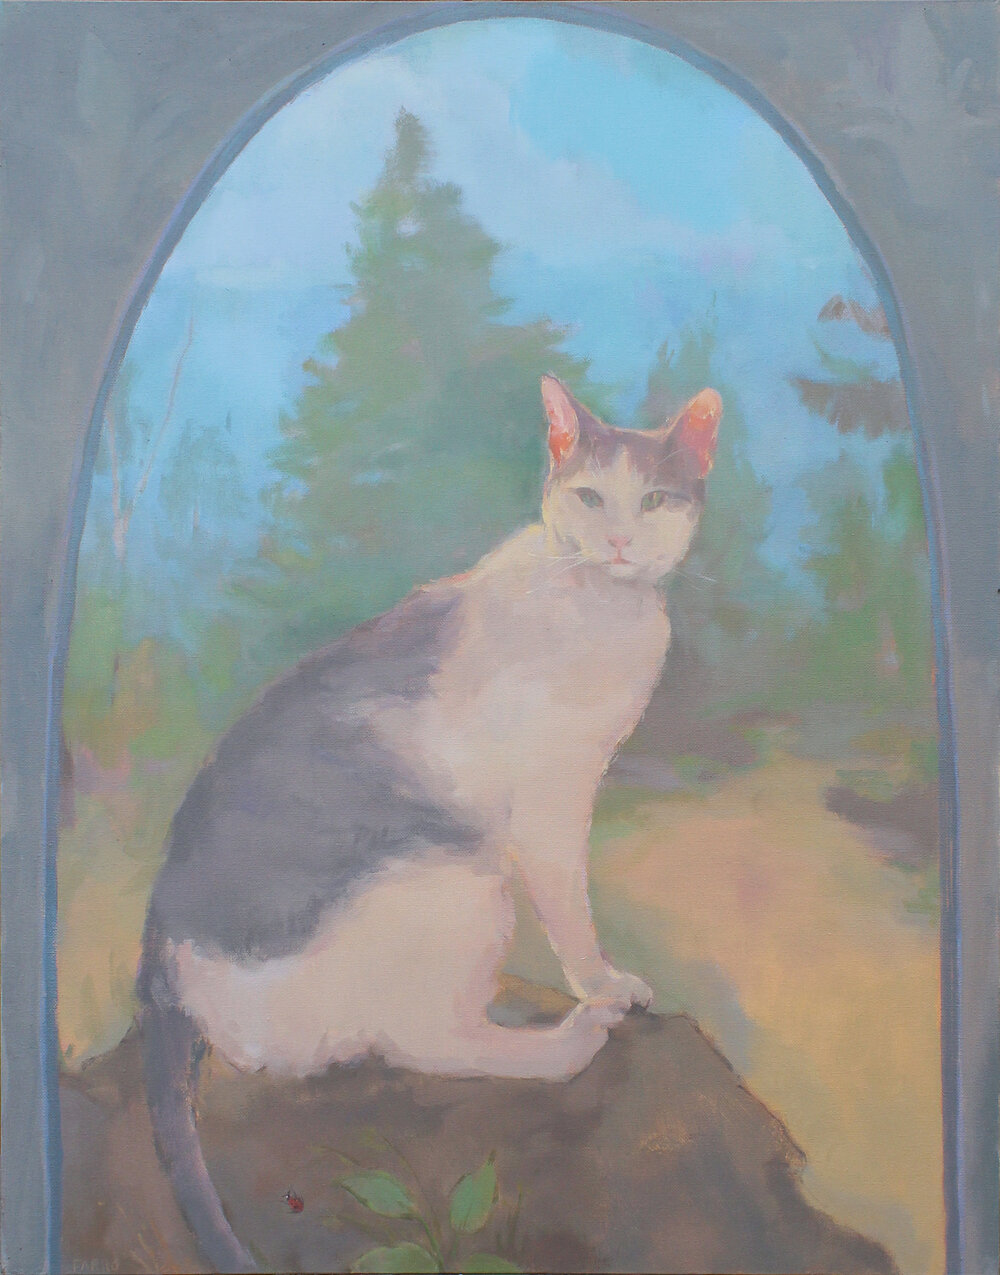    Cat with Pines, Rock, and Ladybug   oil on canvas 28 x 22”   purchase  